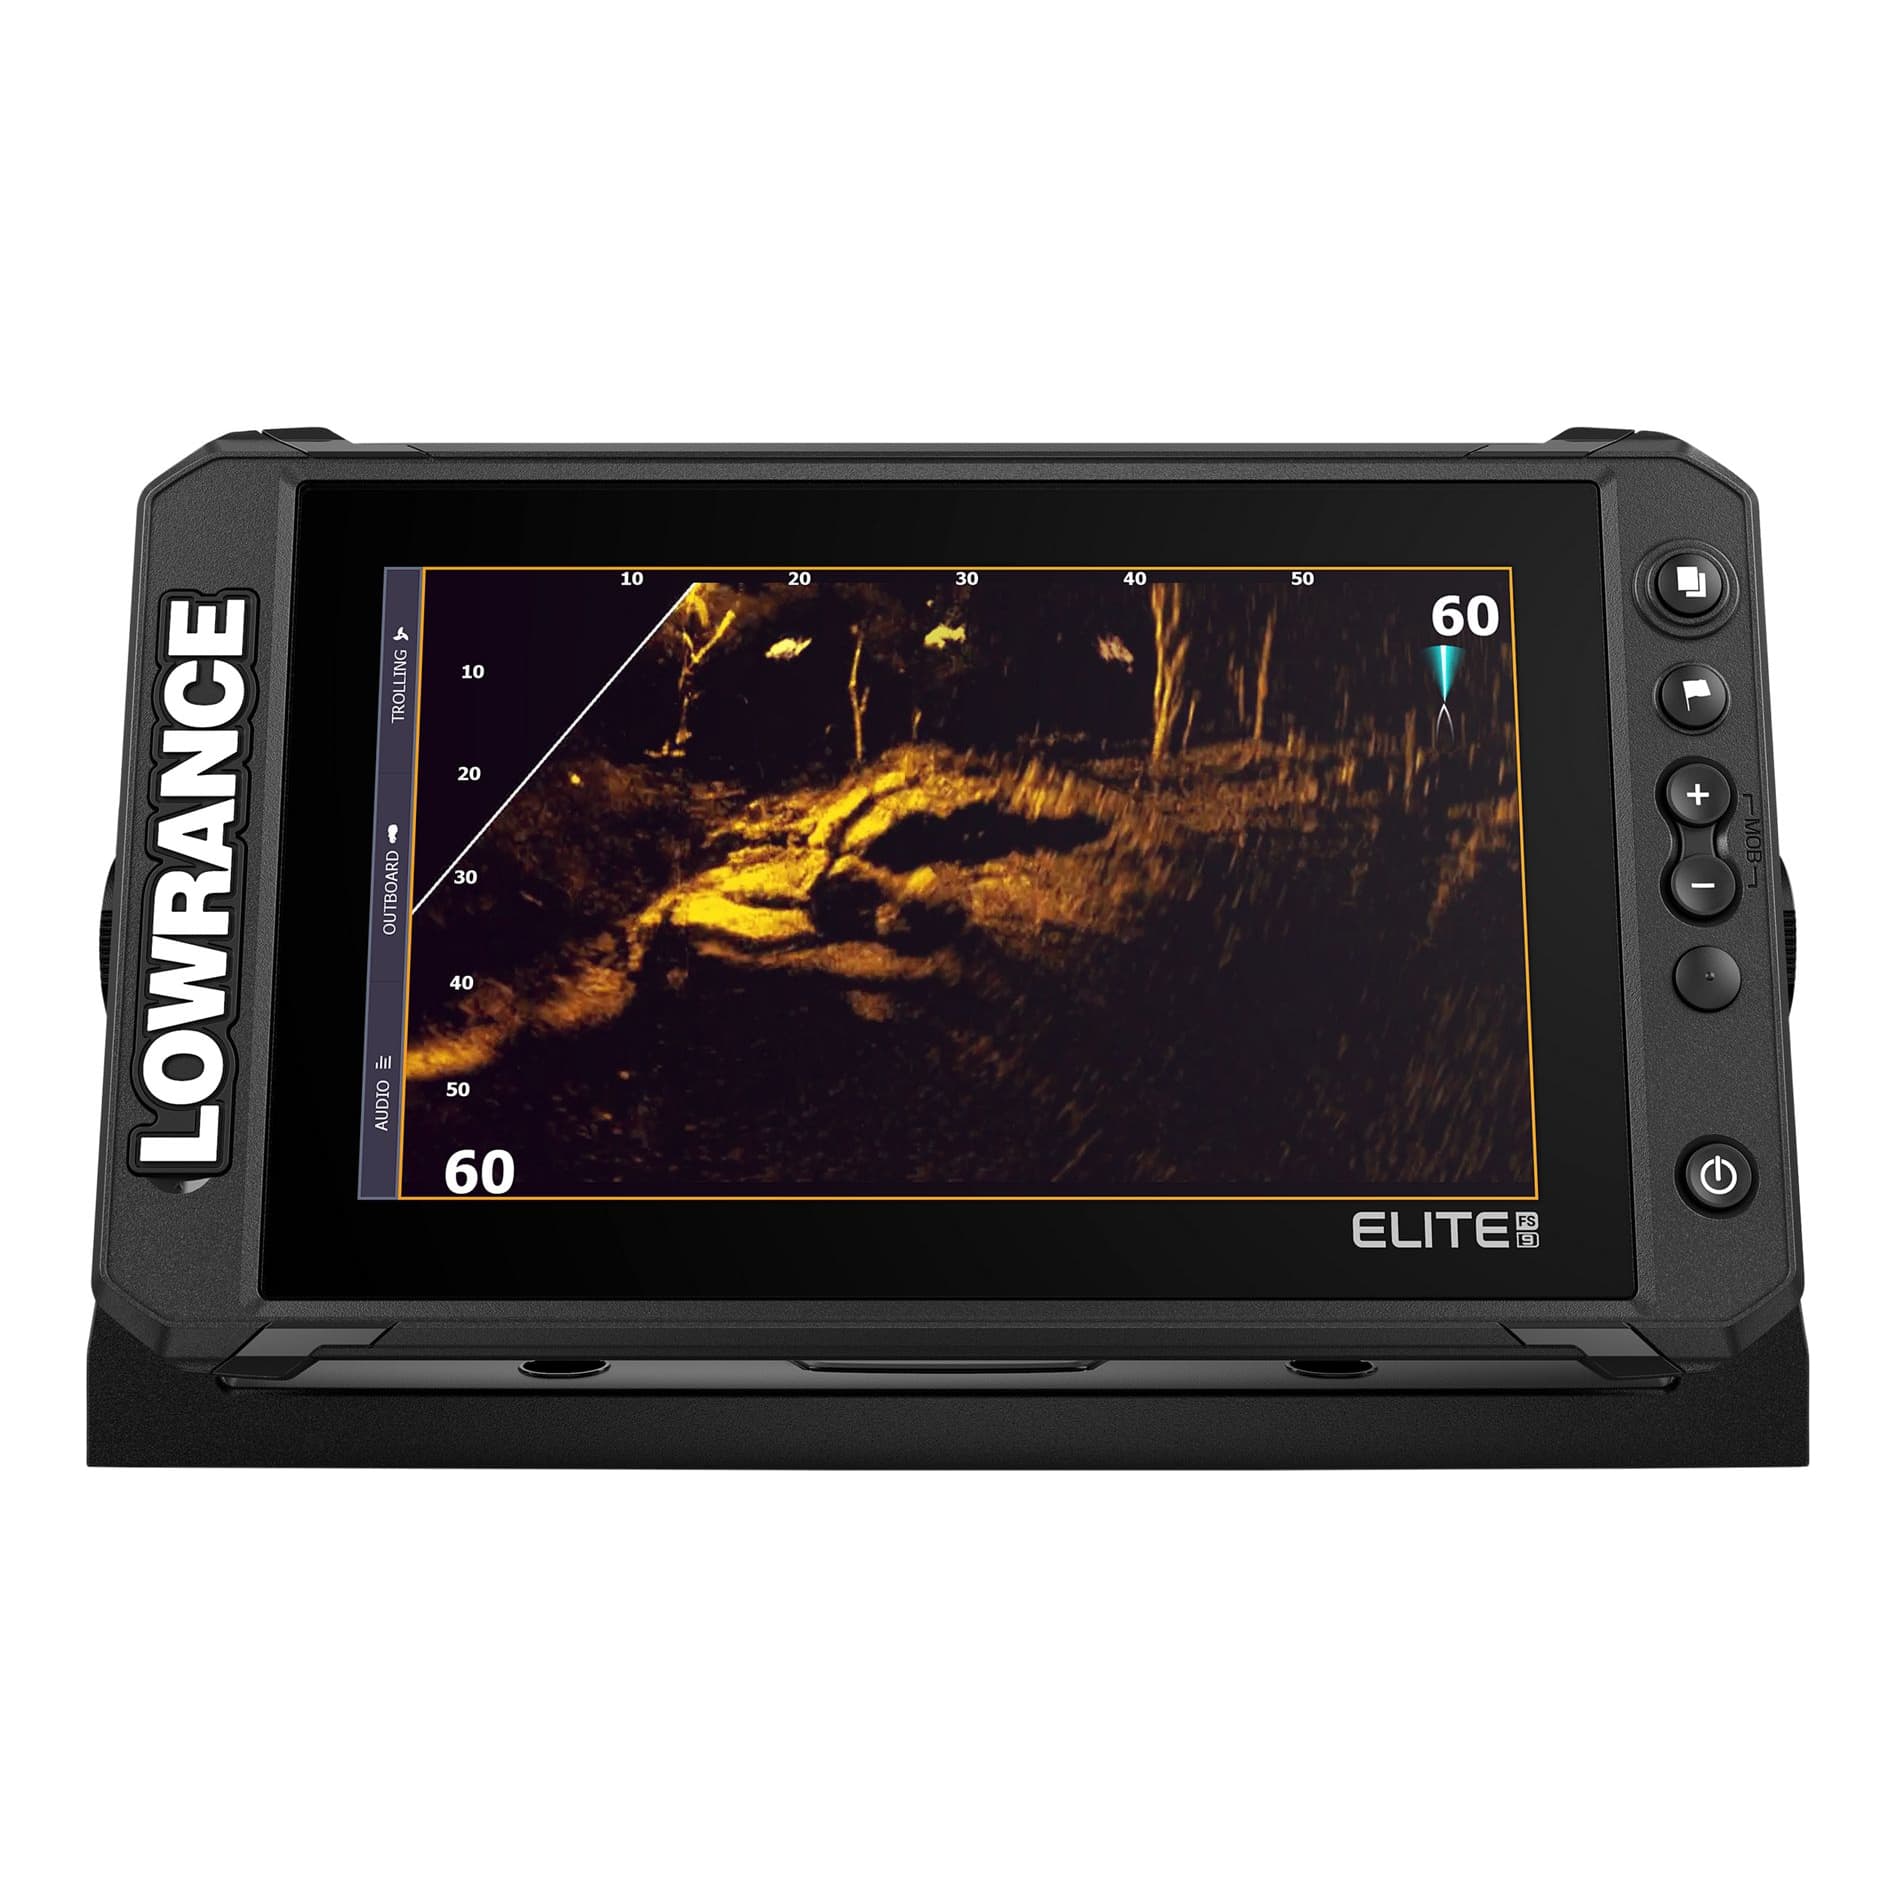 How to Fit Lowrance Hook 7 into PPP18 Ice Fishing Kit 